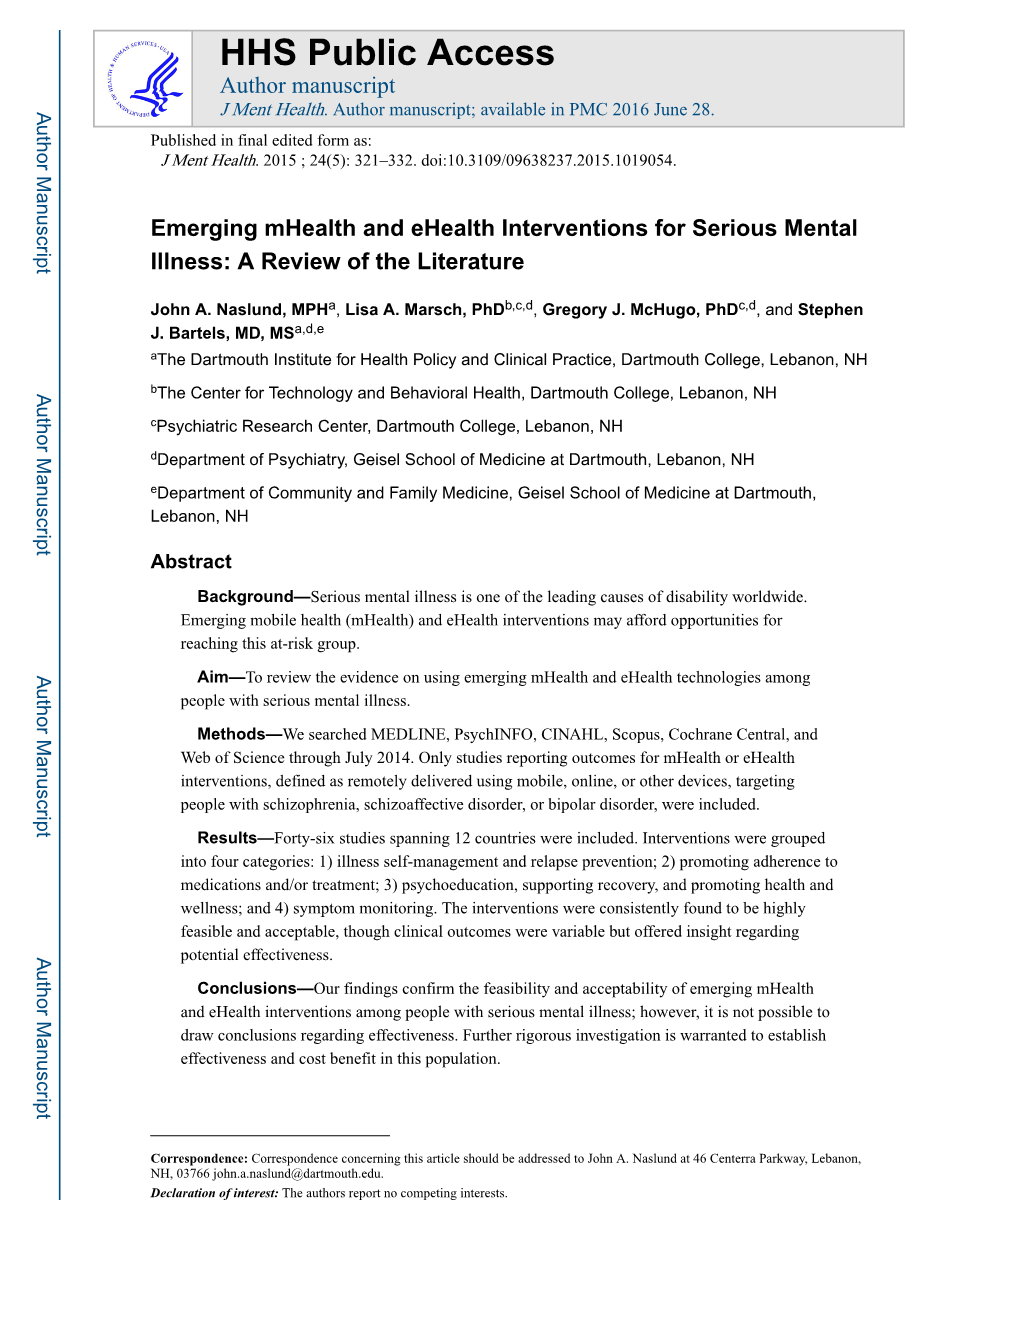 Emerging Mhealth and Ehealth Interventions for Serious Mental Illness: a Review of the Literature